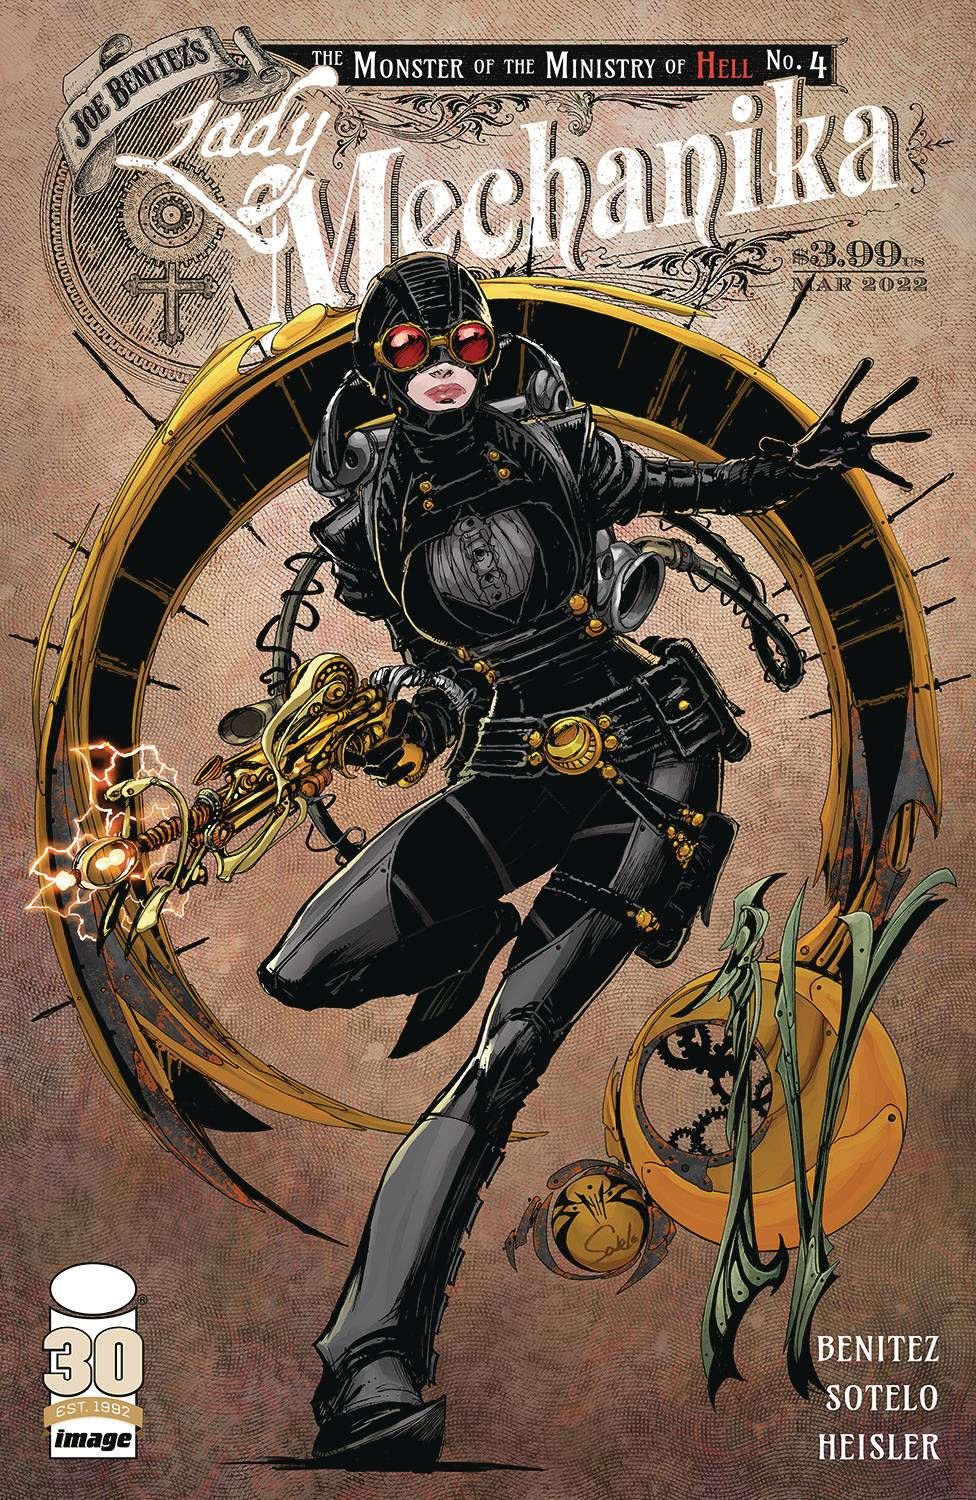 Lady Mechanika: The Monster of the Ministry of Hell #4 Comic